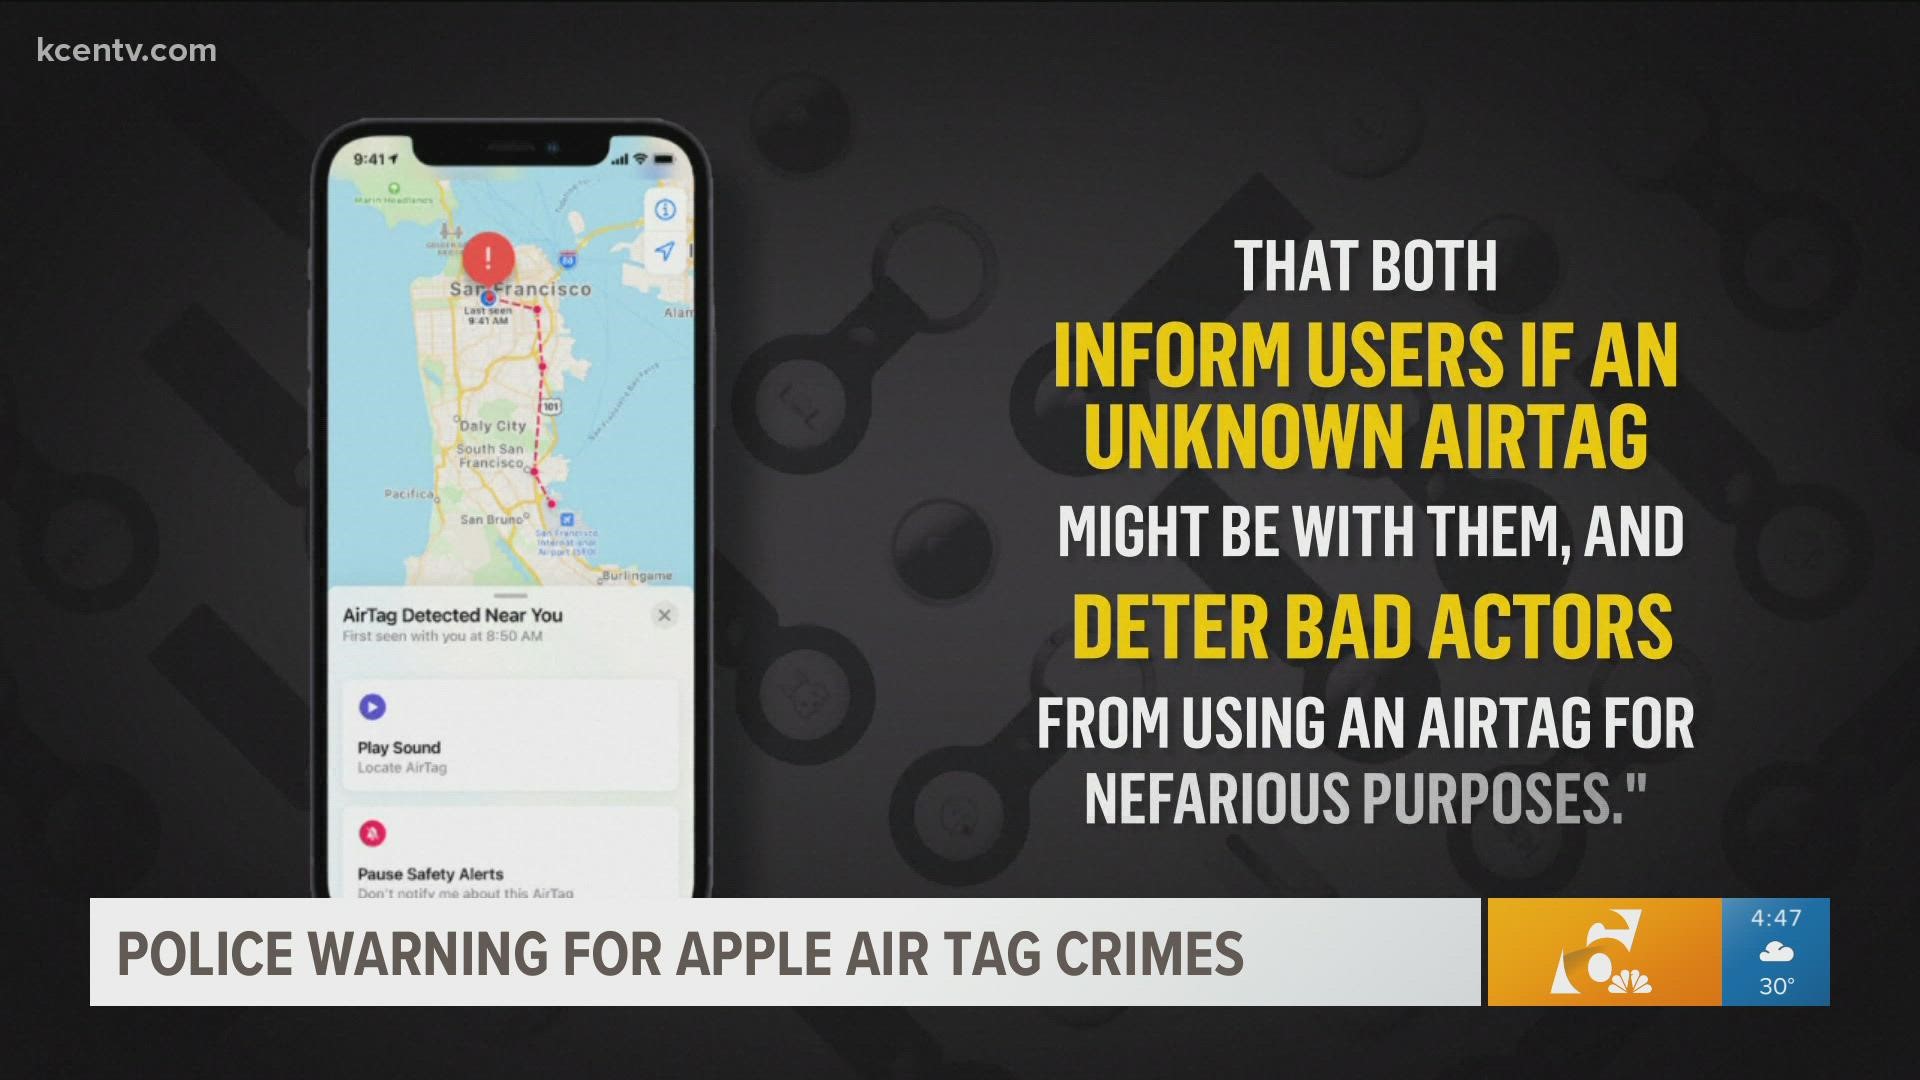 Police are warning people of Apple Air tags that are usually used to track belongings is being used to track others and commit crimes.